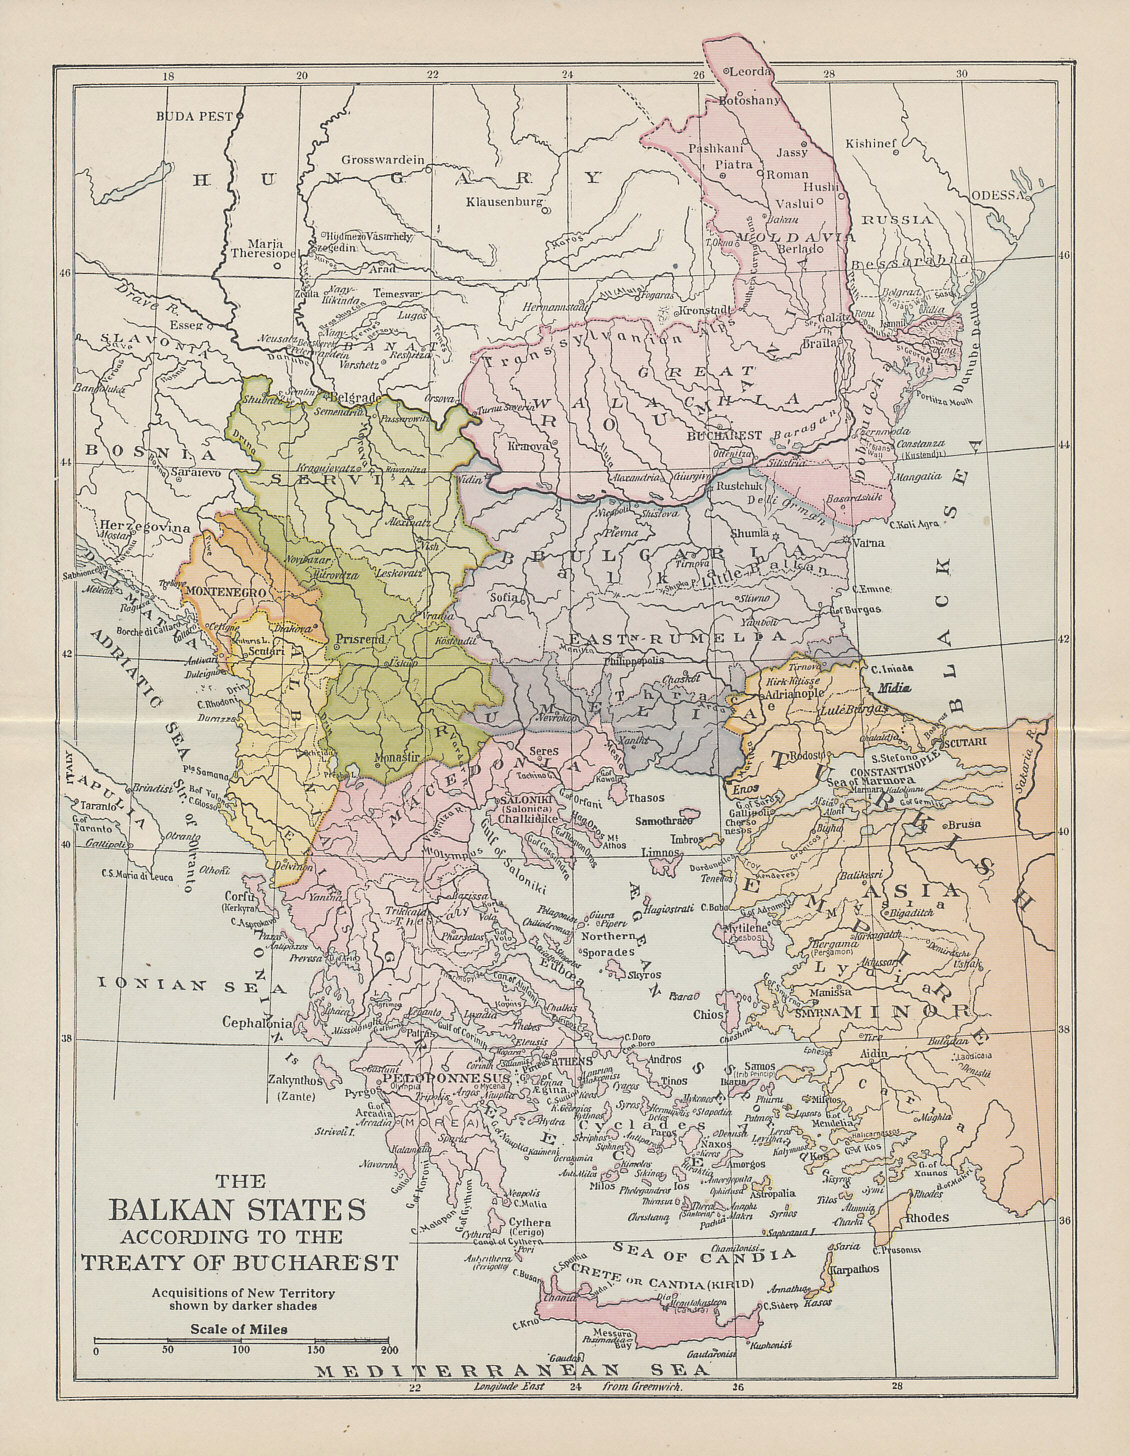 Map showing the territorial gains (darker shades) of Romania, Bulgaria, Serbia, Montenegro, and Greece, primarily at the expense of Turkey, agreed in the Treaty of Bucharest following the Second Balkan War. Despite its gains, Bulgaria also lost territory to both Romania and Turkey.